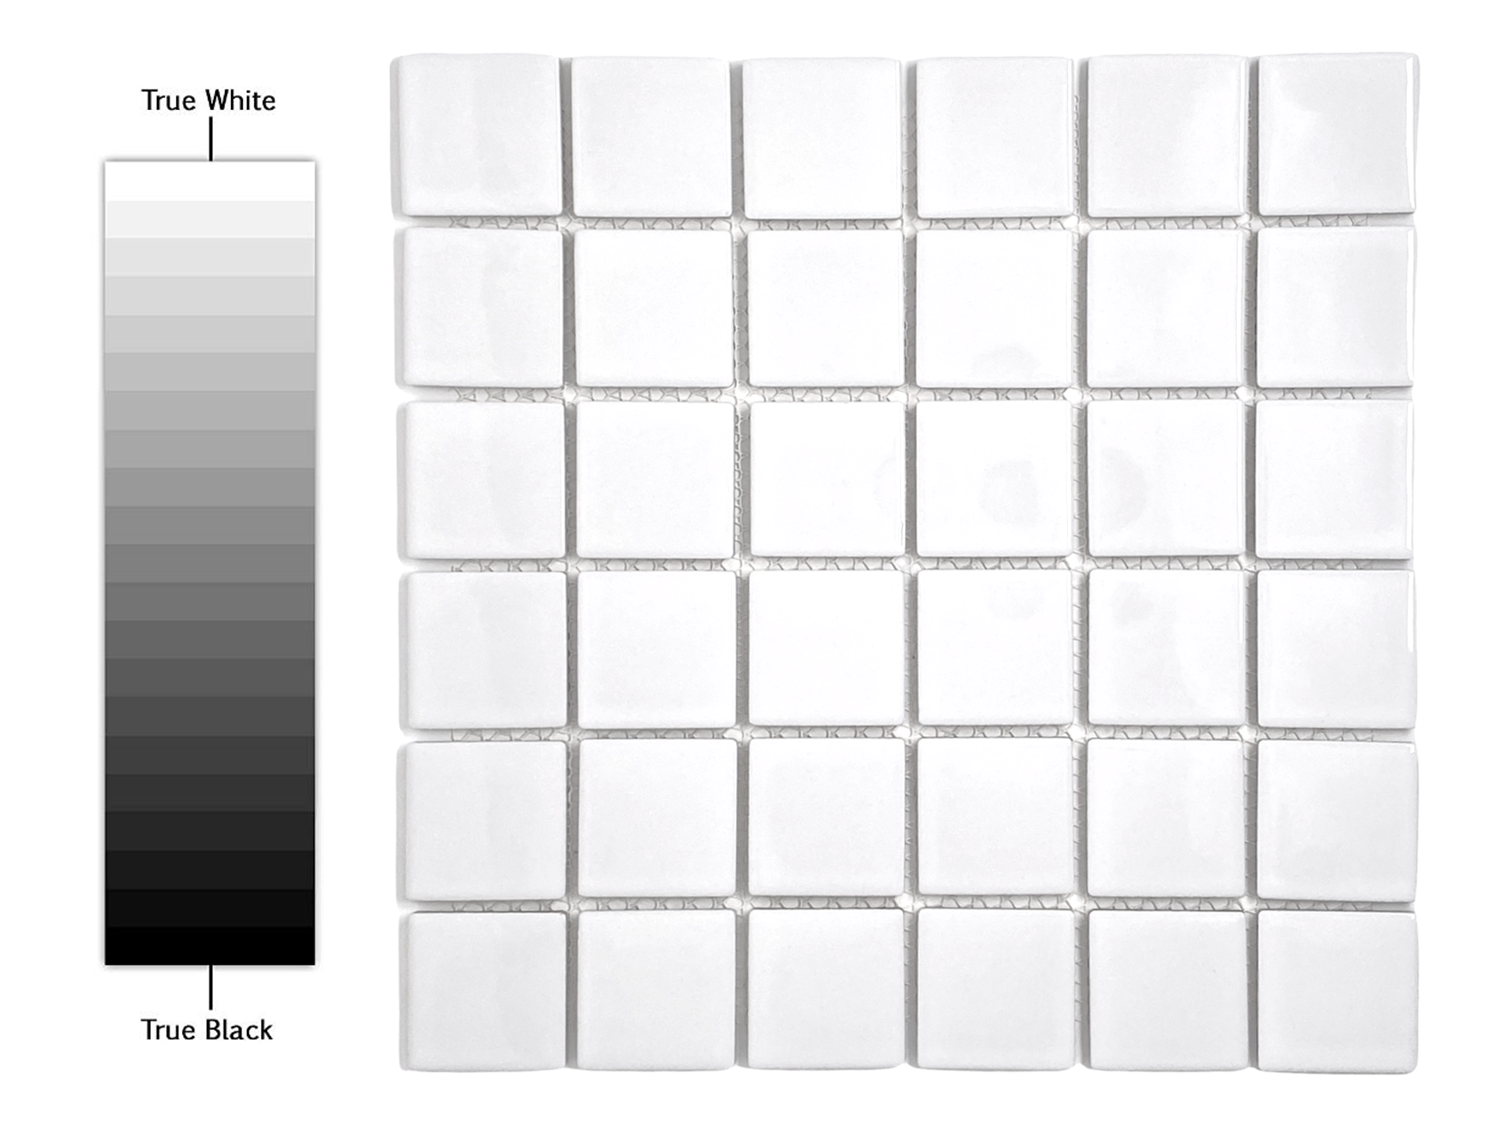 Tenedos Premium Quality 2" (Exact Size 1-15/16 in.) White Porcelain Square Mosaic Tile Shiny Look Designed in Italy (12x12) for Kitchen Backsplash, Pool Tile, Bathroom Wall, Accent Wall